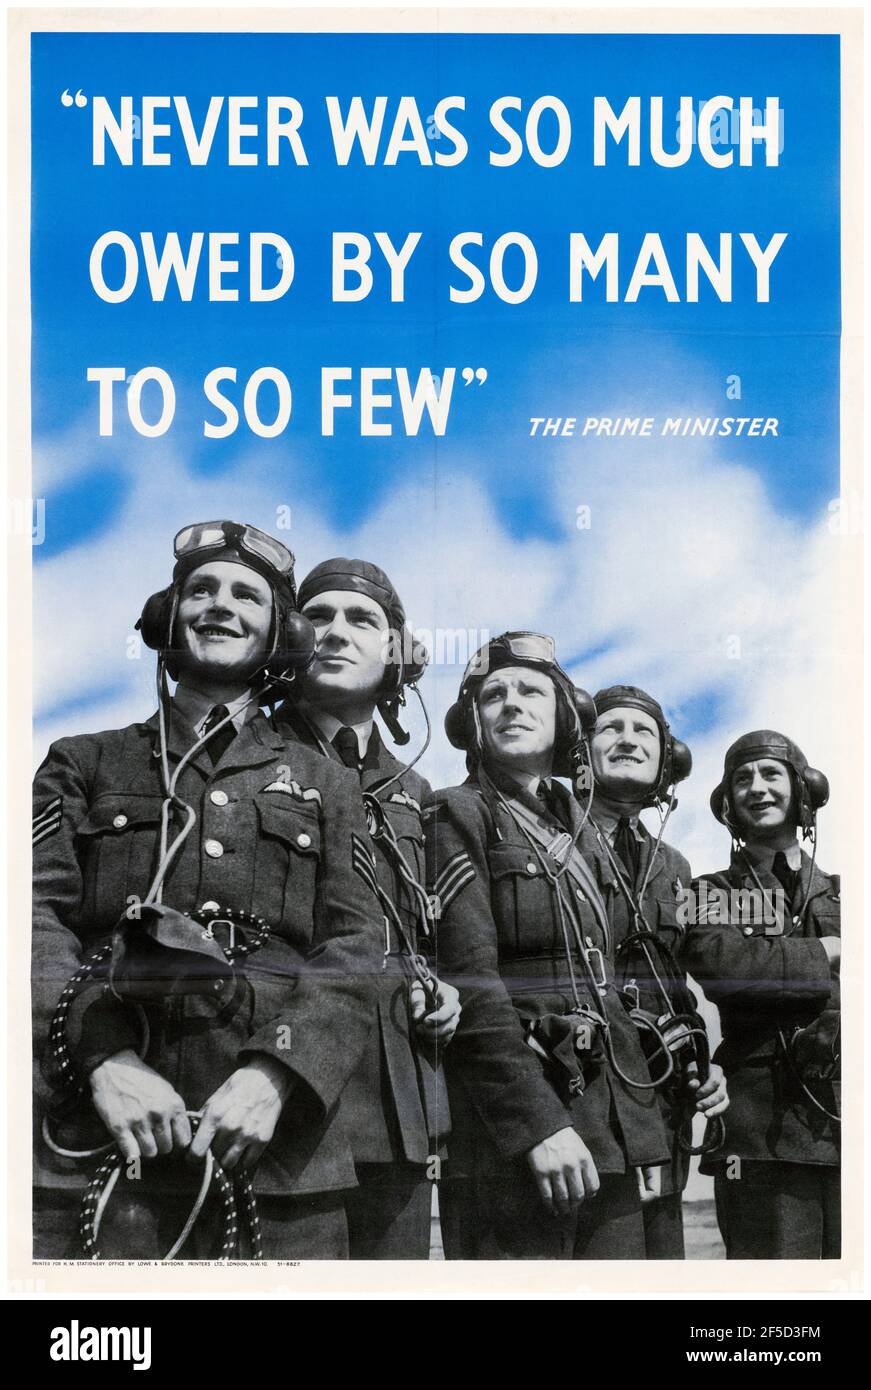 Winston Churchill quote, Battle of Britain, WW2 motivational poster, Never was so much owed by so many, to so few, (featuring fighter Pilots), 1942-1945 Stock Photo